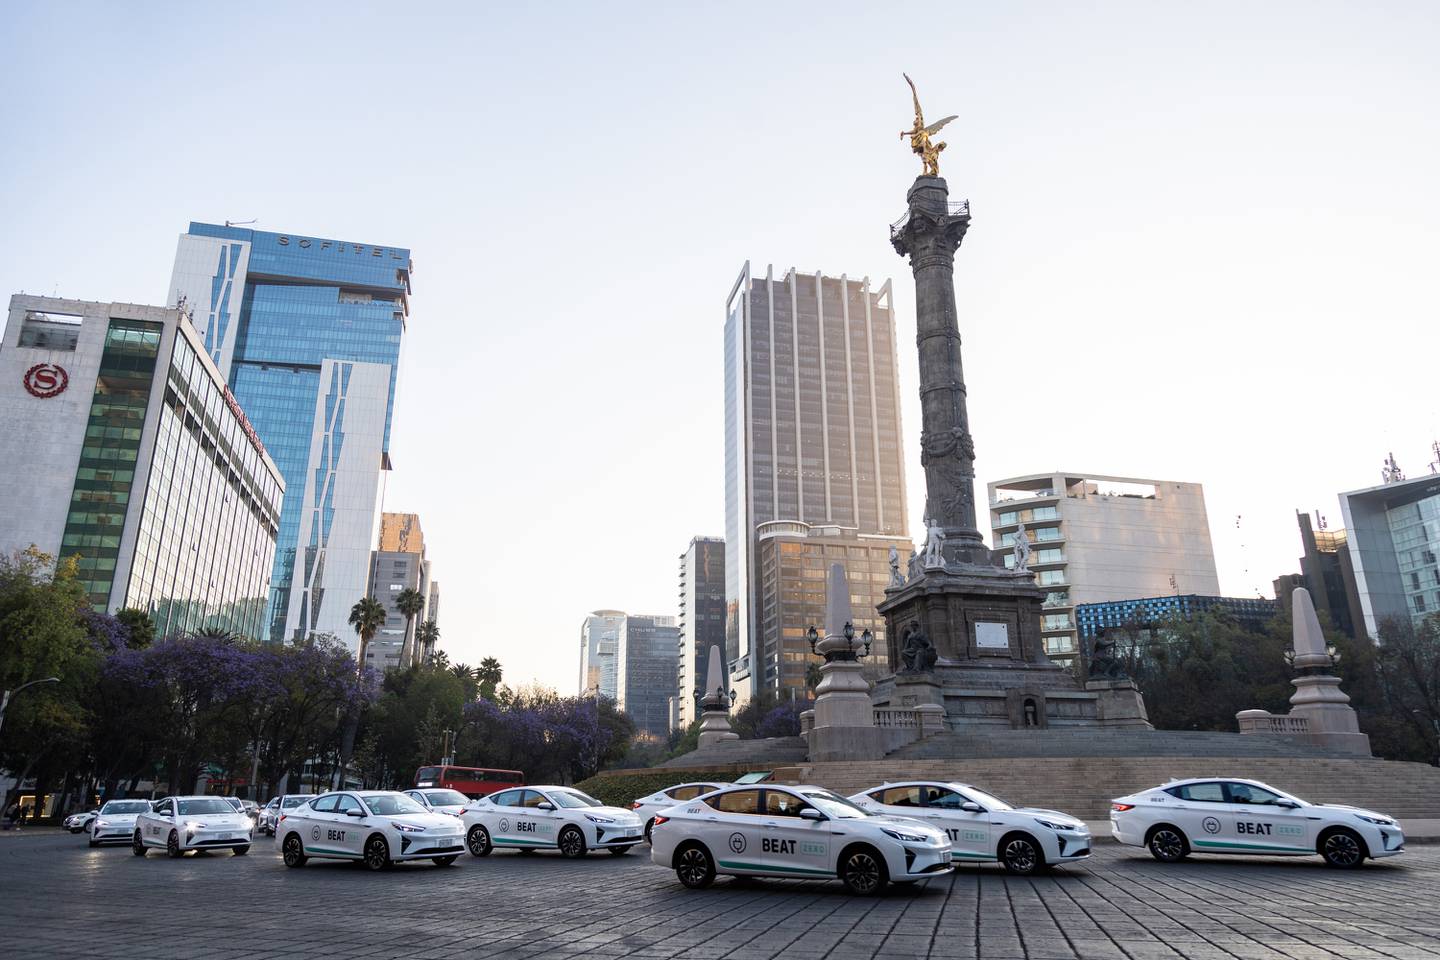 What set the company apart in Mexico from other ride-hailing apps was its fleet of electric vehicles. Photo: Beat